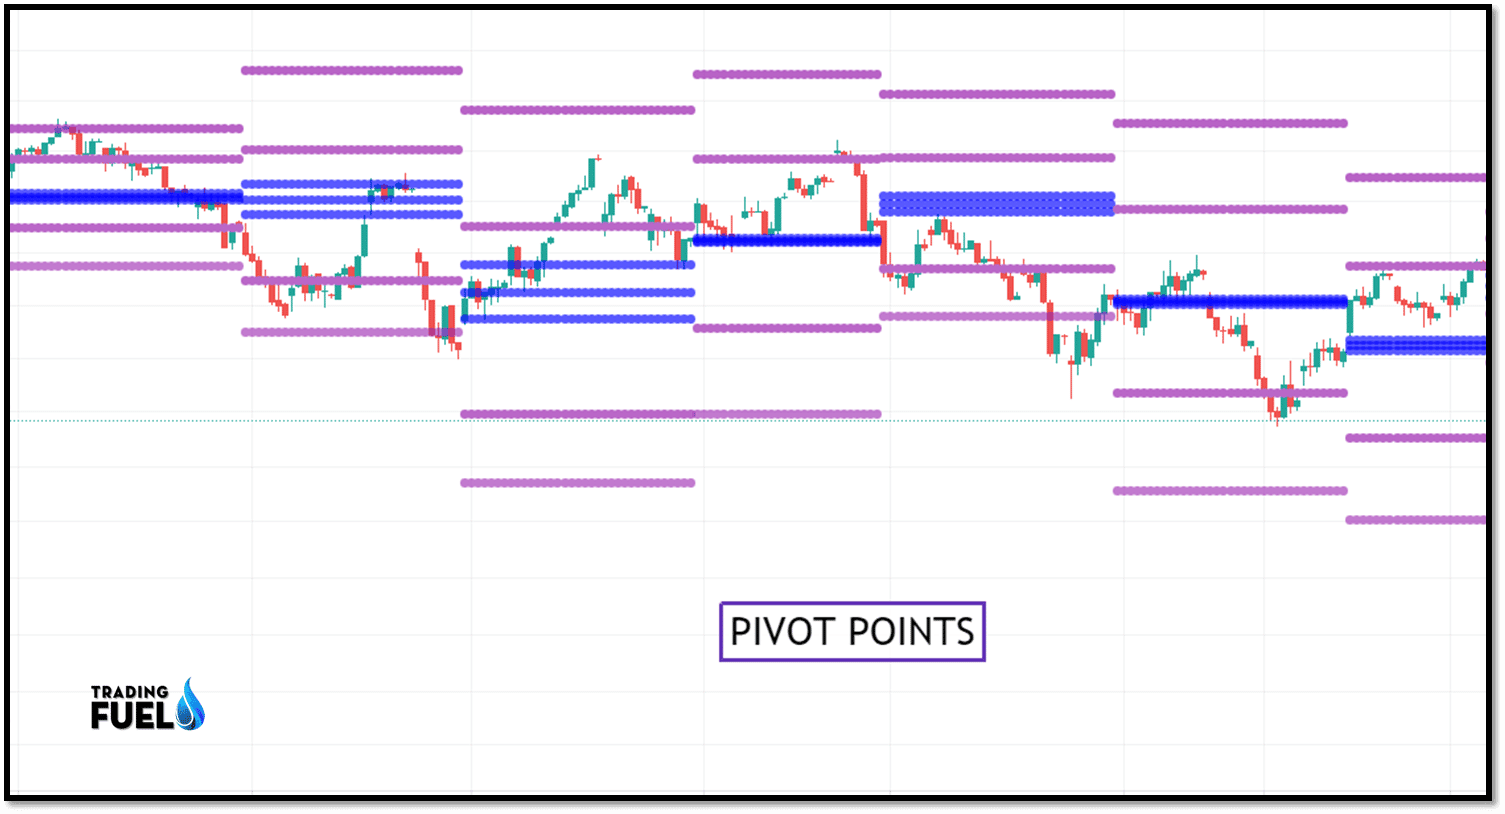 What are Pivot Points